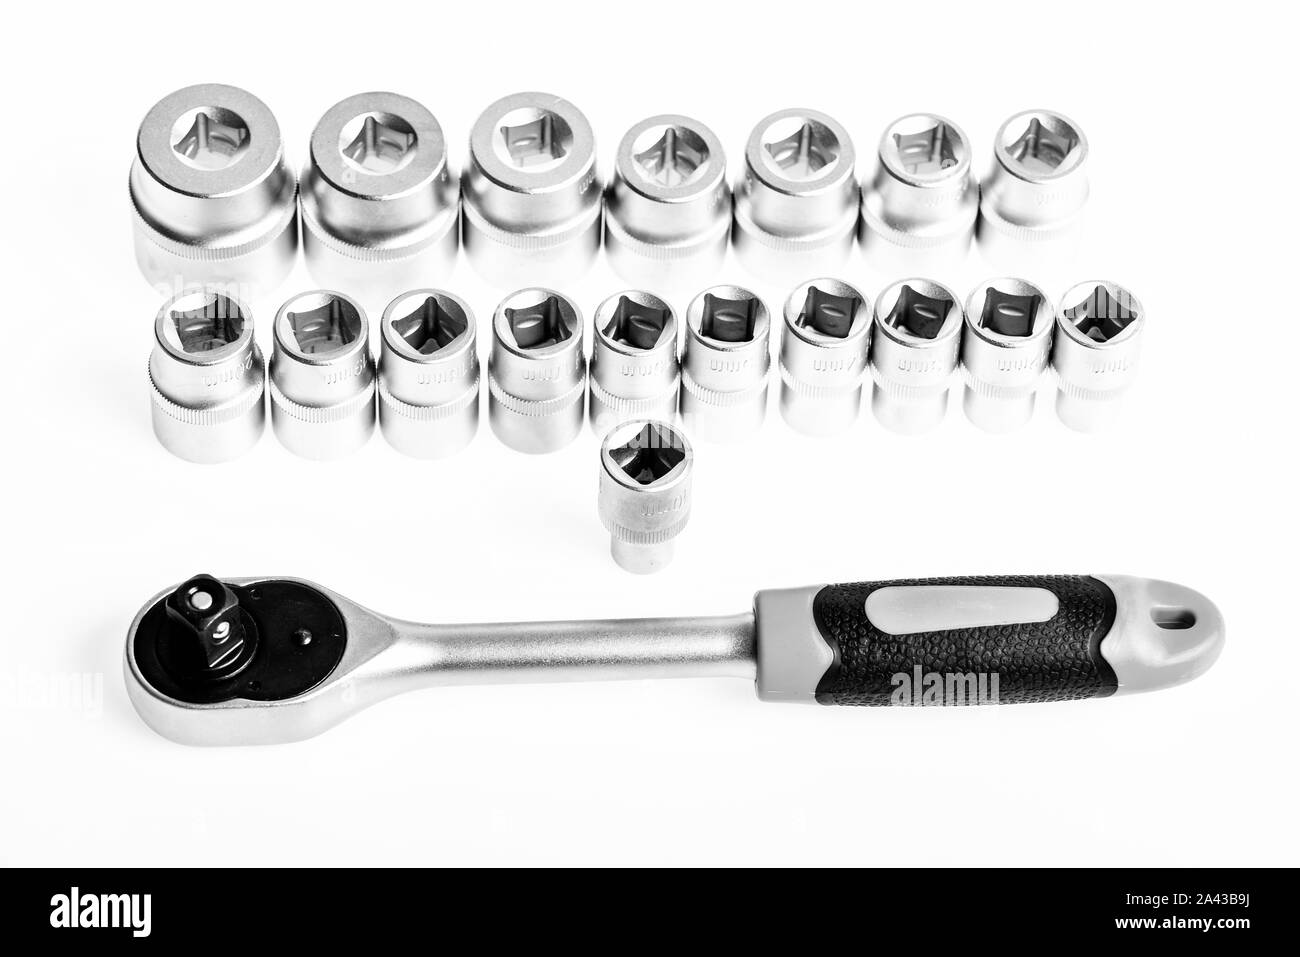 socket wrench isolated on white background. It is A Promise. various wrench heads and tips. Toolbox, tools kit detail close up. Socket Spanner Wrench. Stock Photo